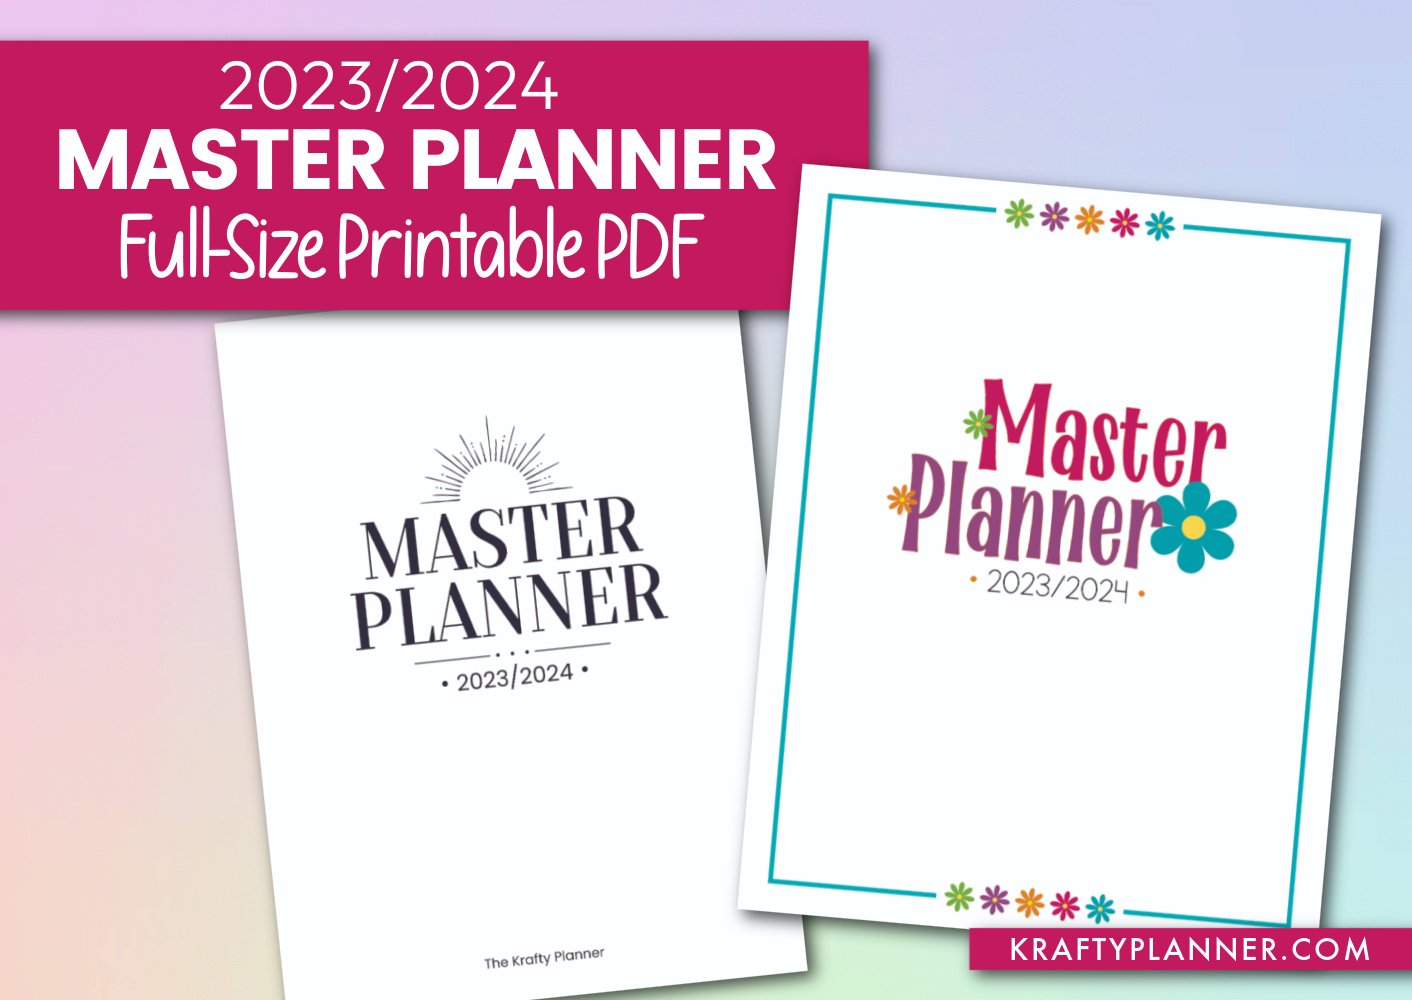 Printable Life Planner 2024 - Make this your year! - Start planning!